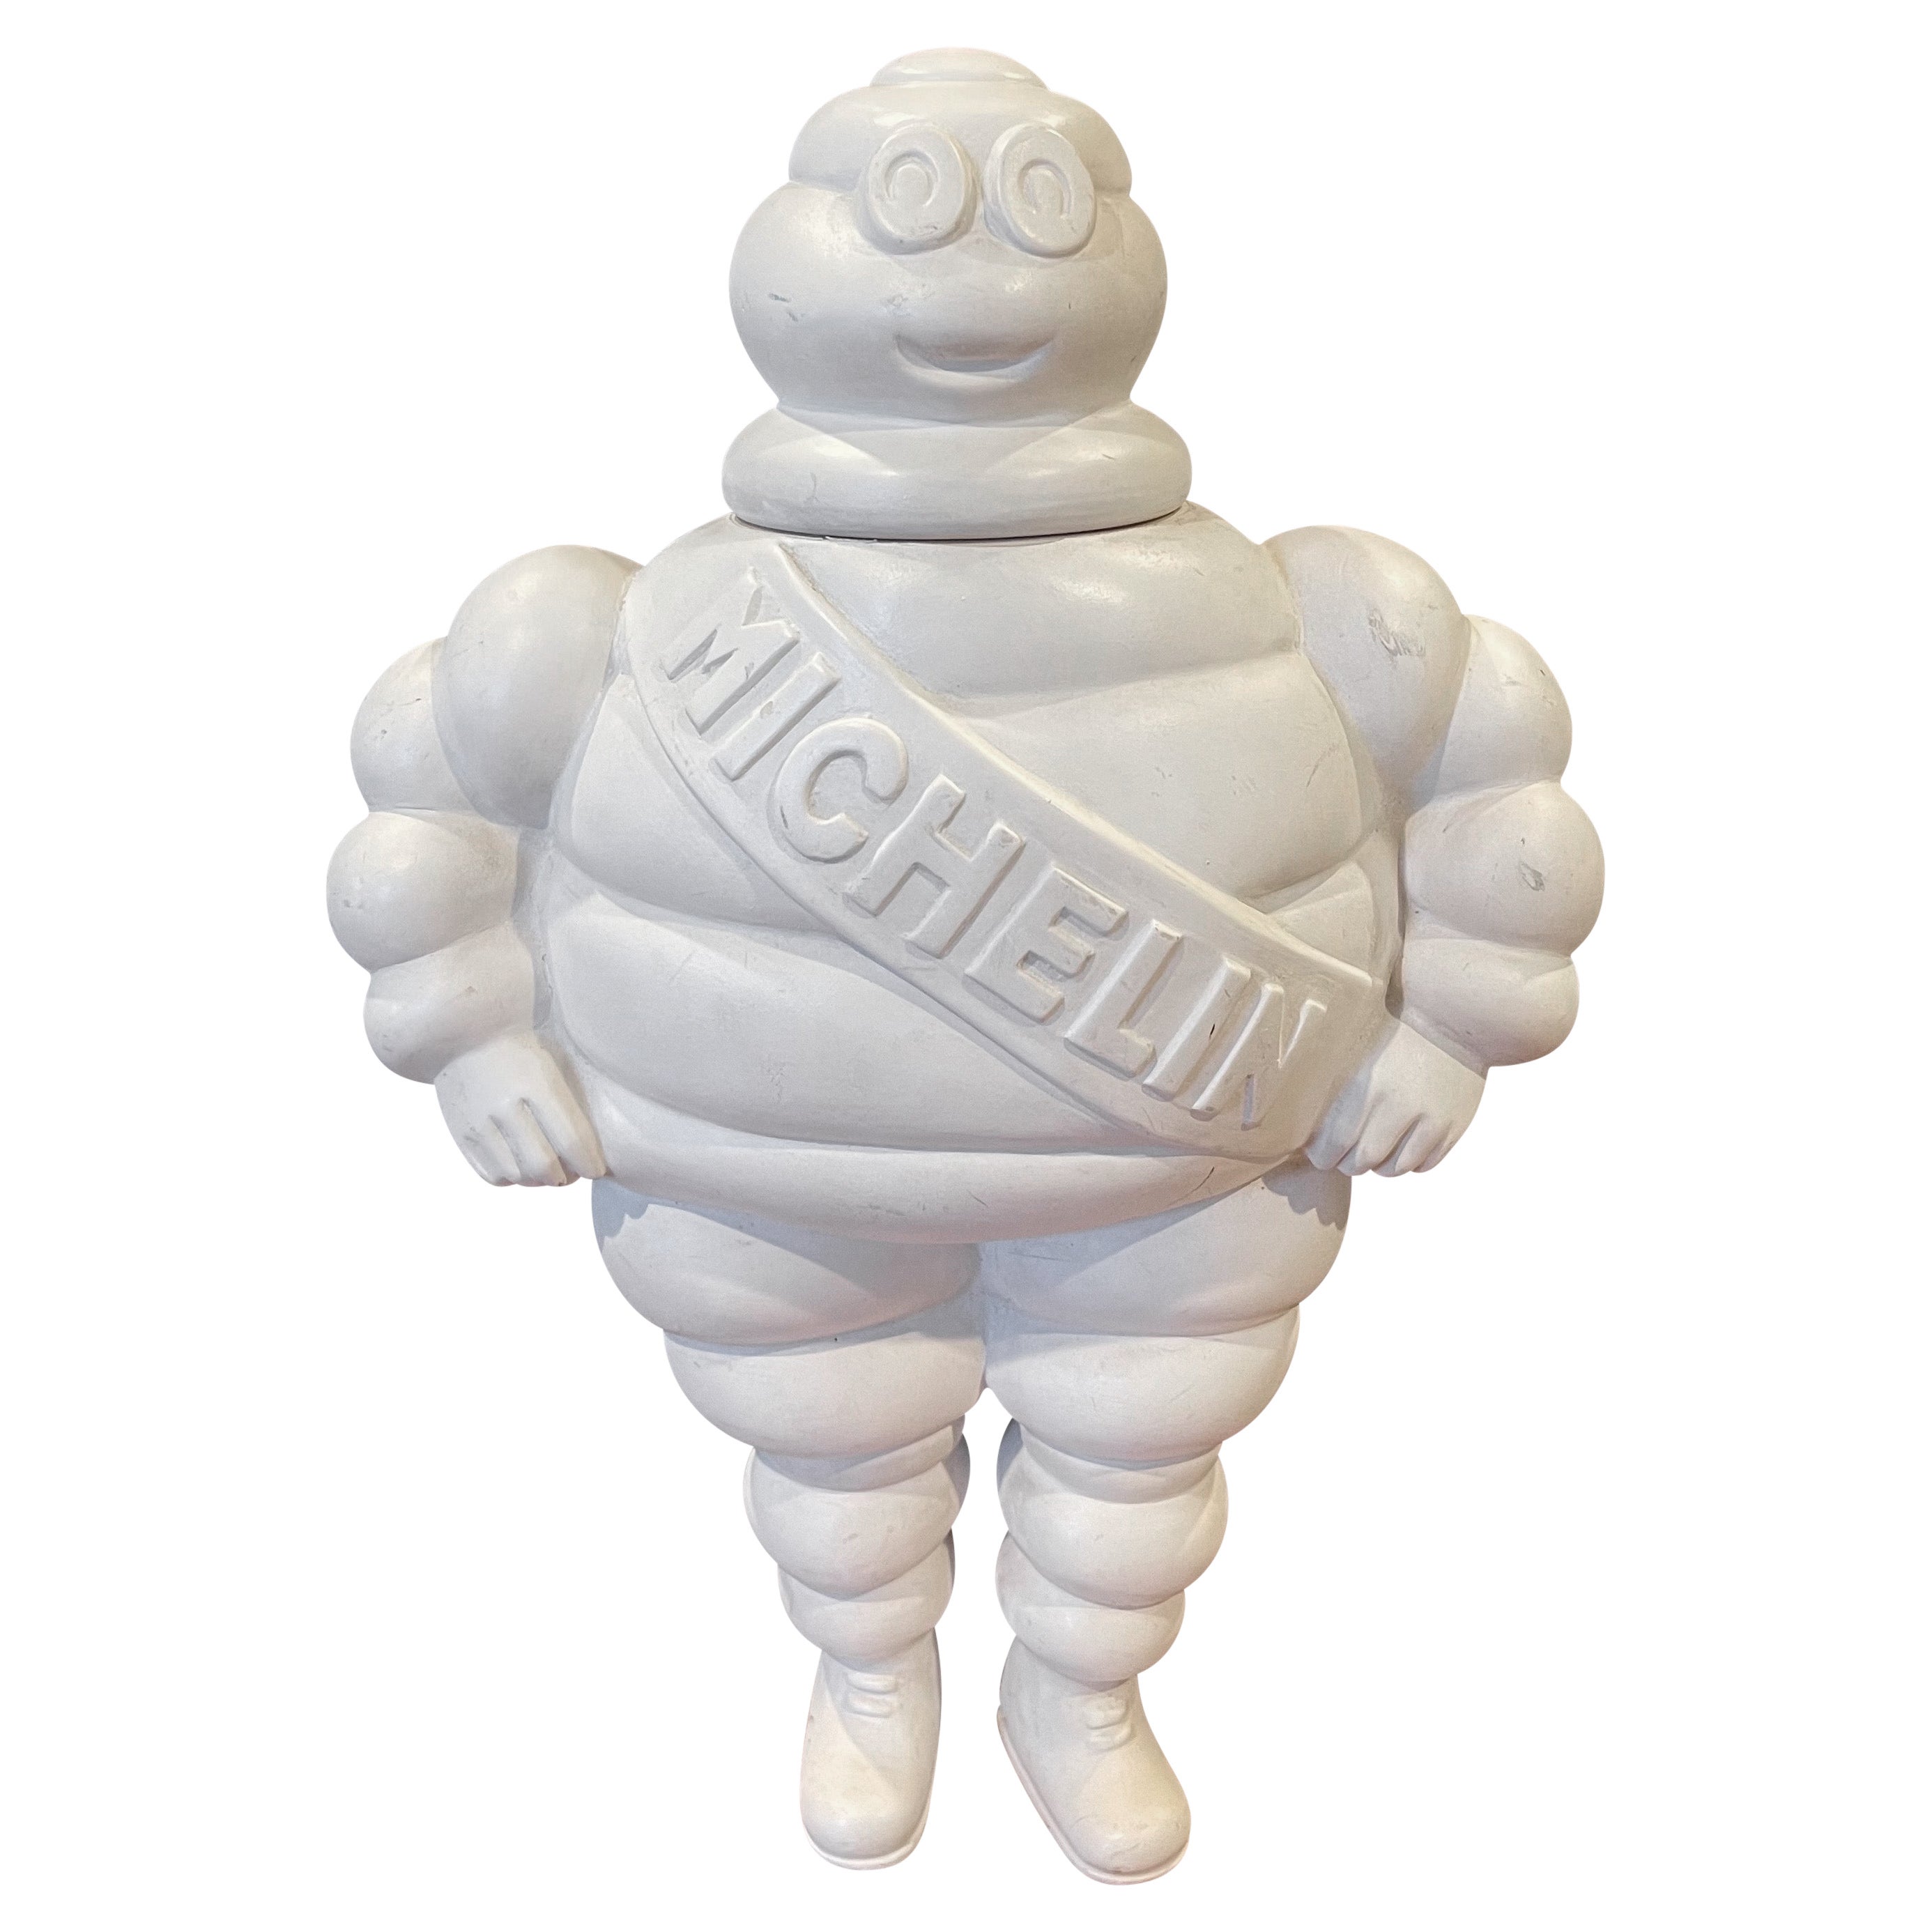 Michelin Man painted aluminium collectable Michelin man mascot standing on base 